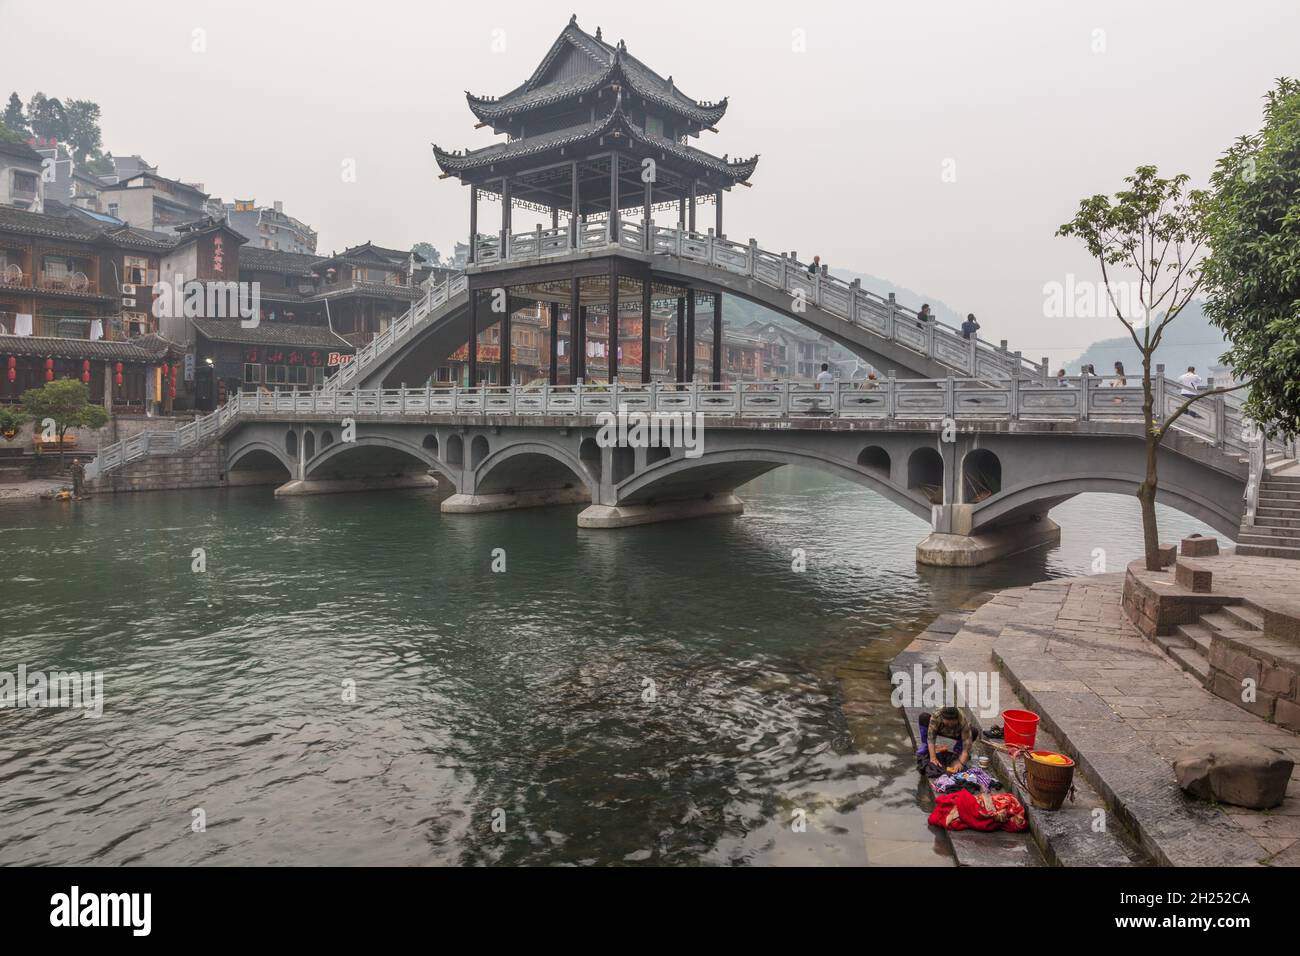 A woman does laundry in the Tuojiang River in front of the Fenghuang Bridge. Fenghuang, China. Stock Photo